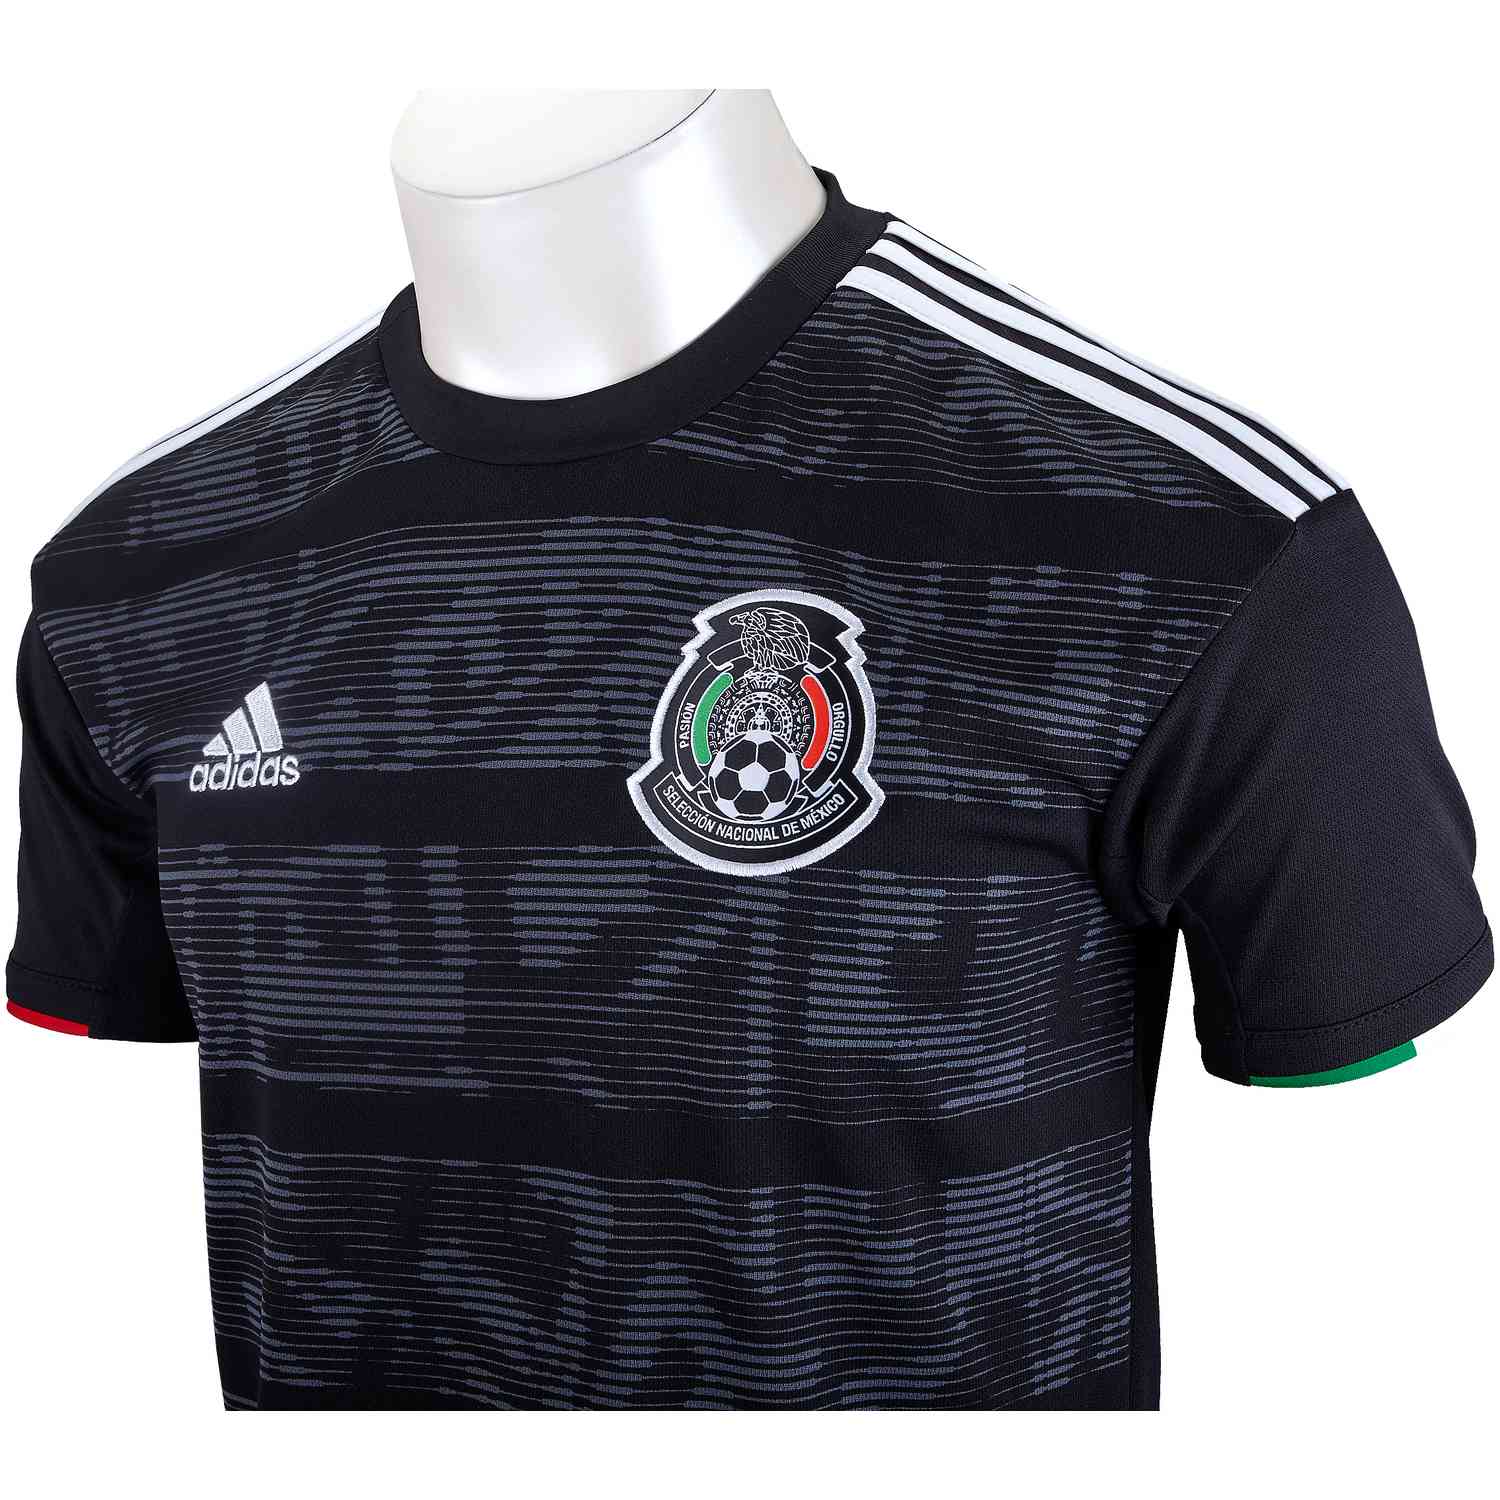 mexico jersey 2019 kids